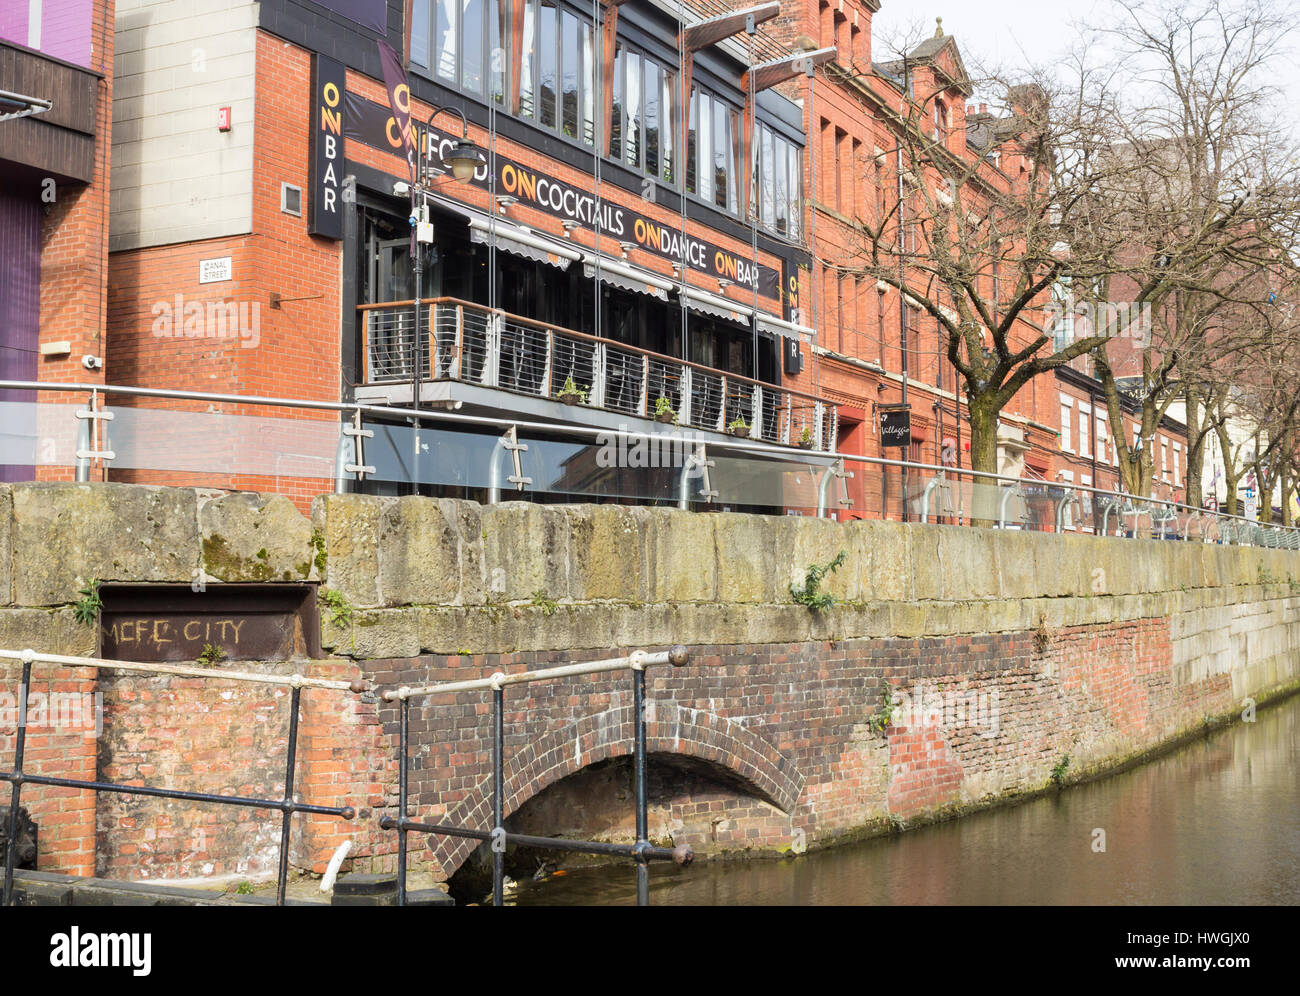 Canal Street in Manchesters Gay Village. Manchester, England. UK Stockfoto